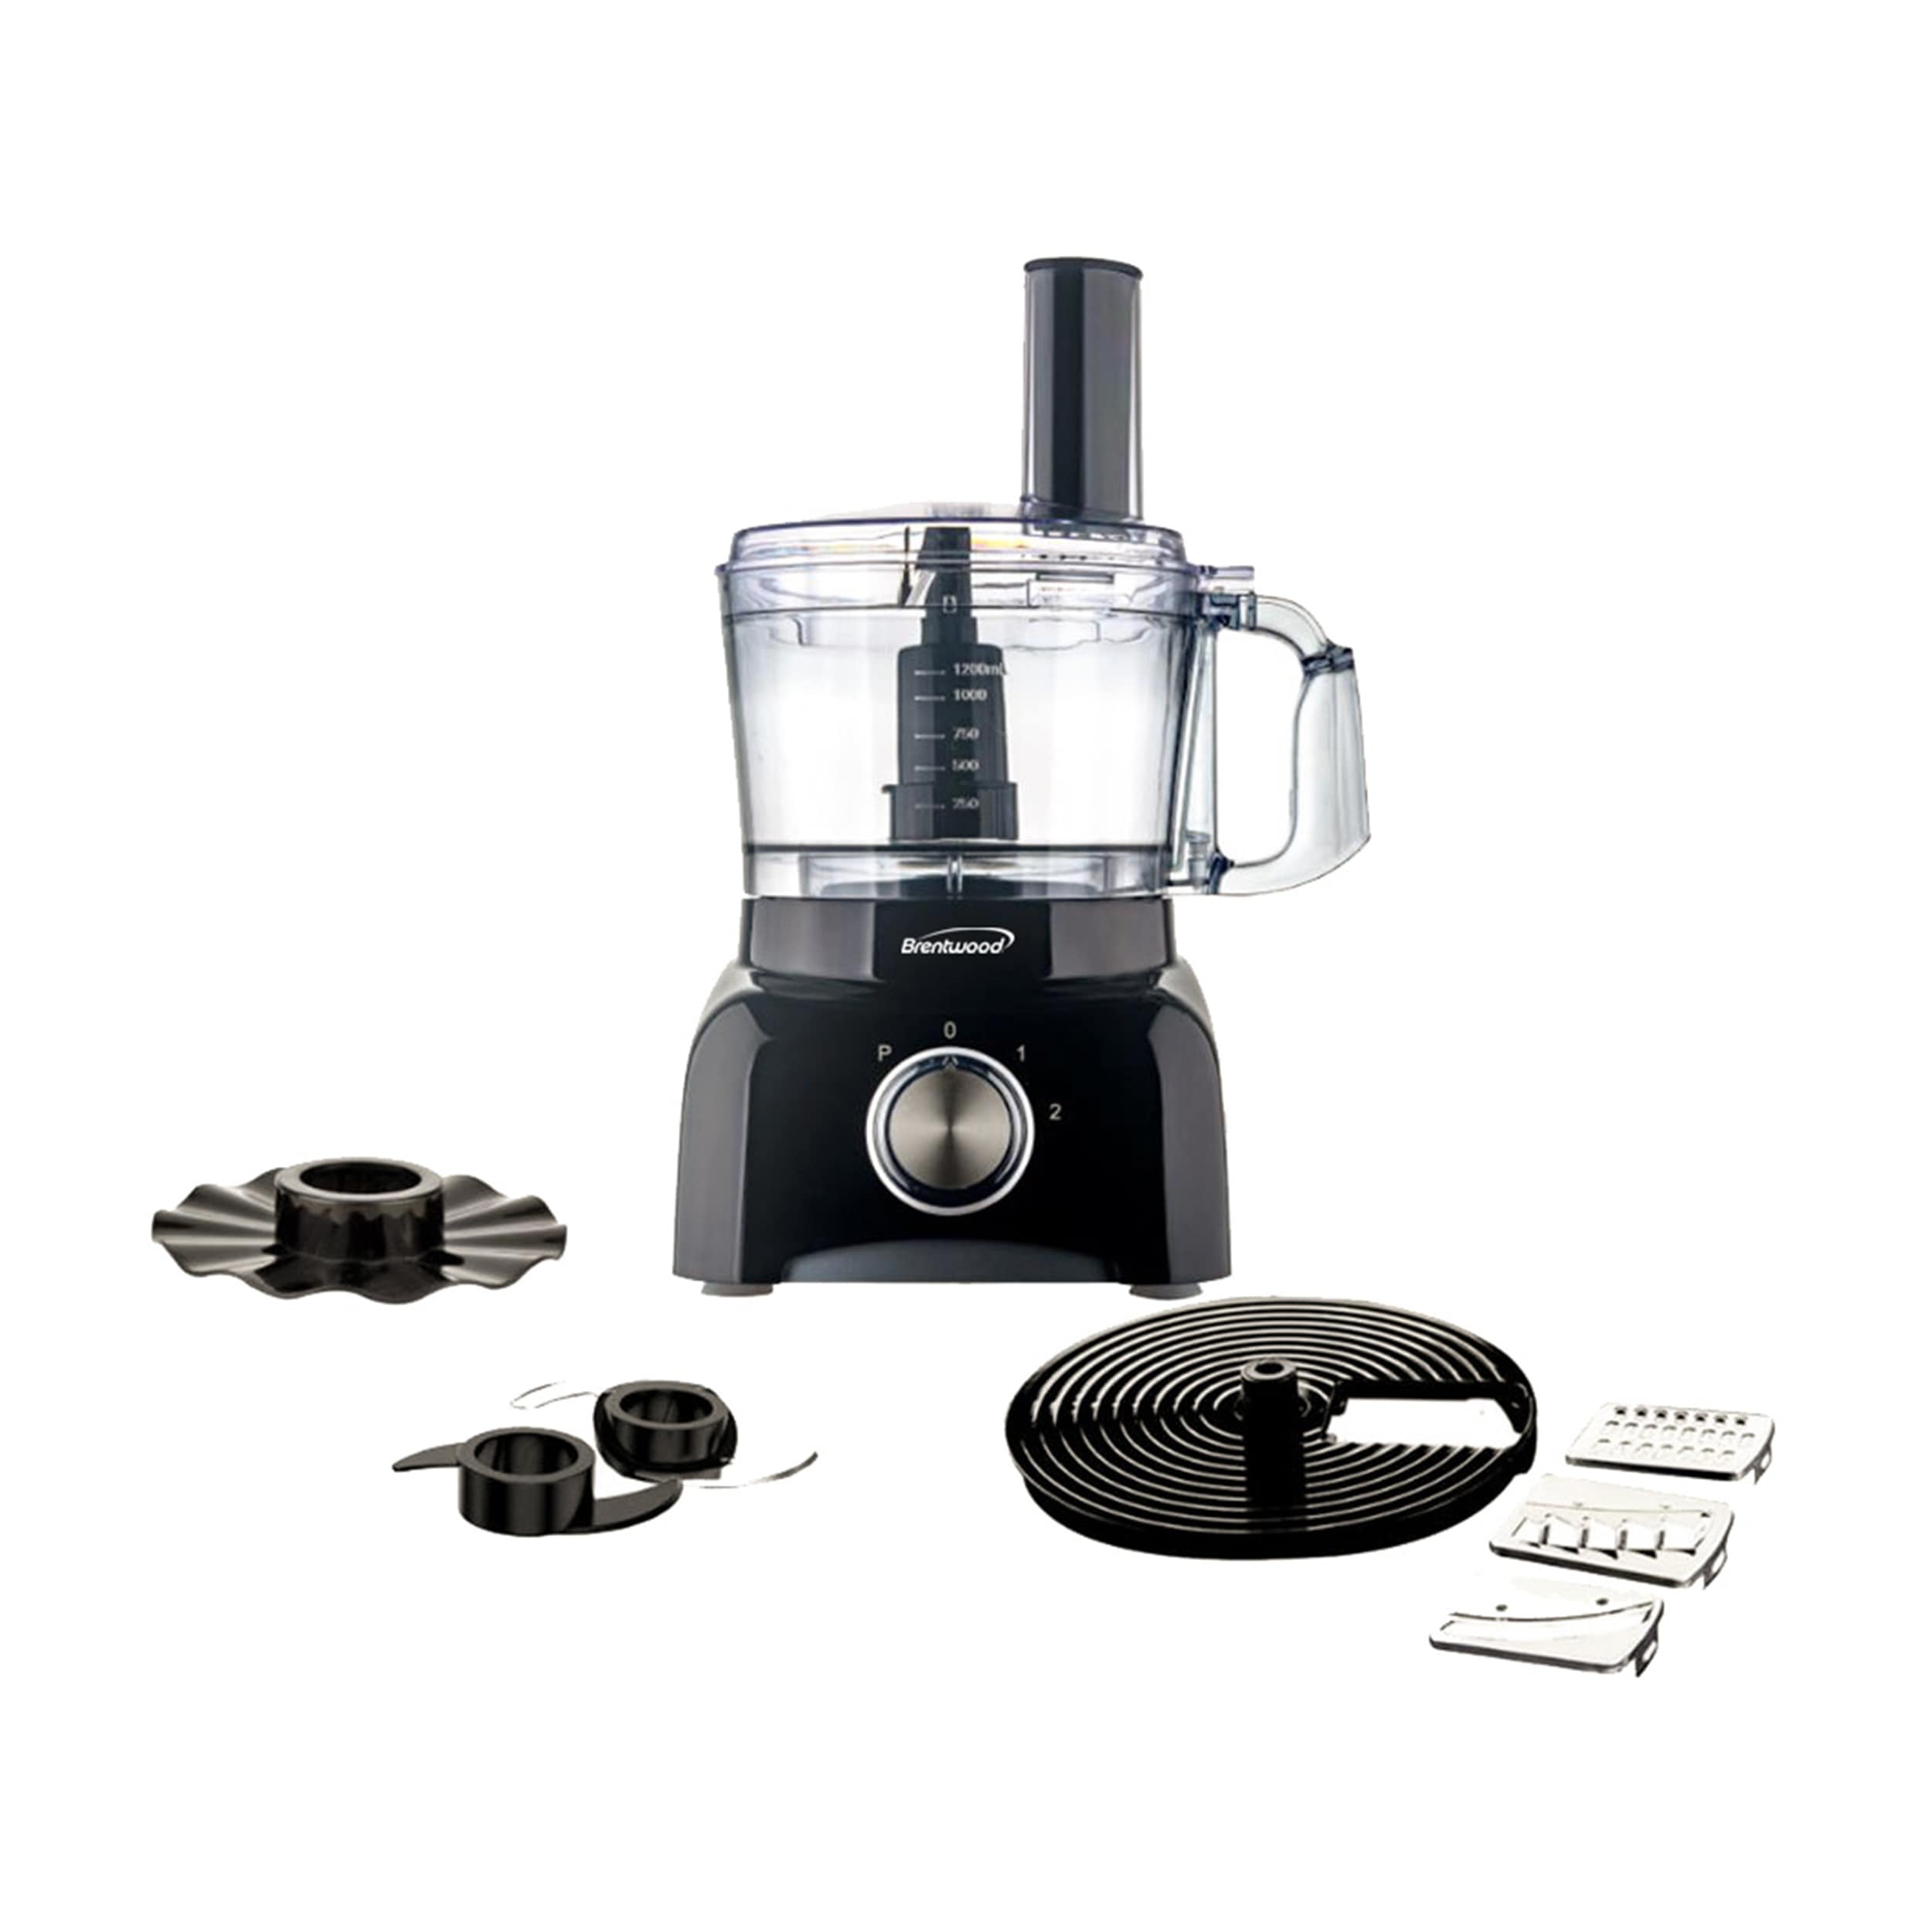 https://ak1.ostkcdn.com/images/products/is/images/direct/ab472b7bd1ad79007c74677e766b5f59dd4a5b95/Brentwood-5-Cup-Food-Processor-in-Black.jpg